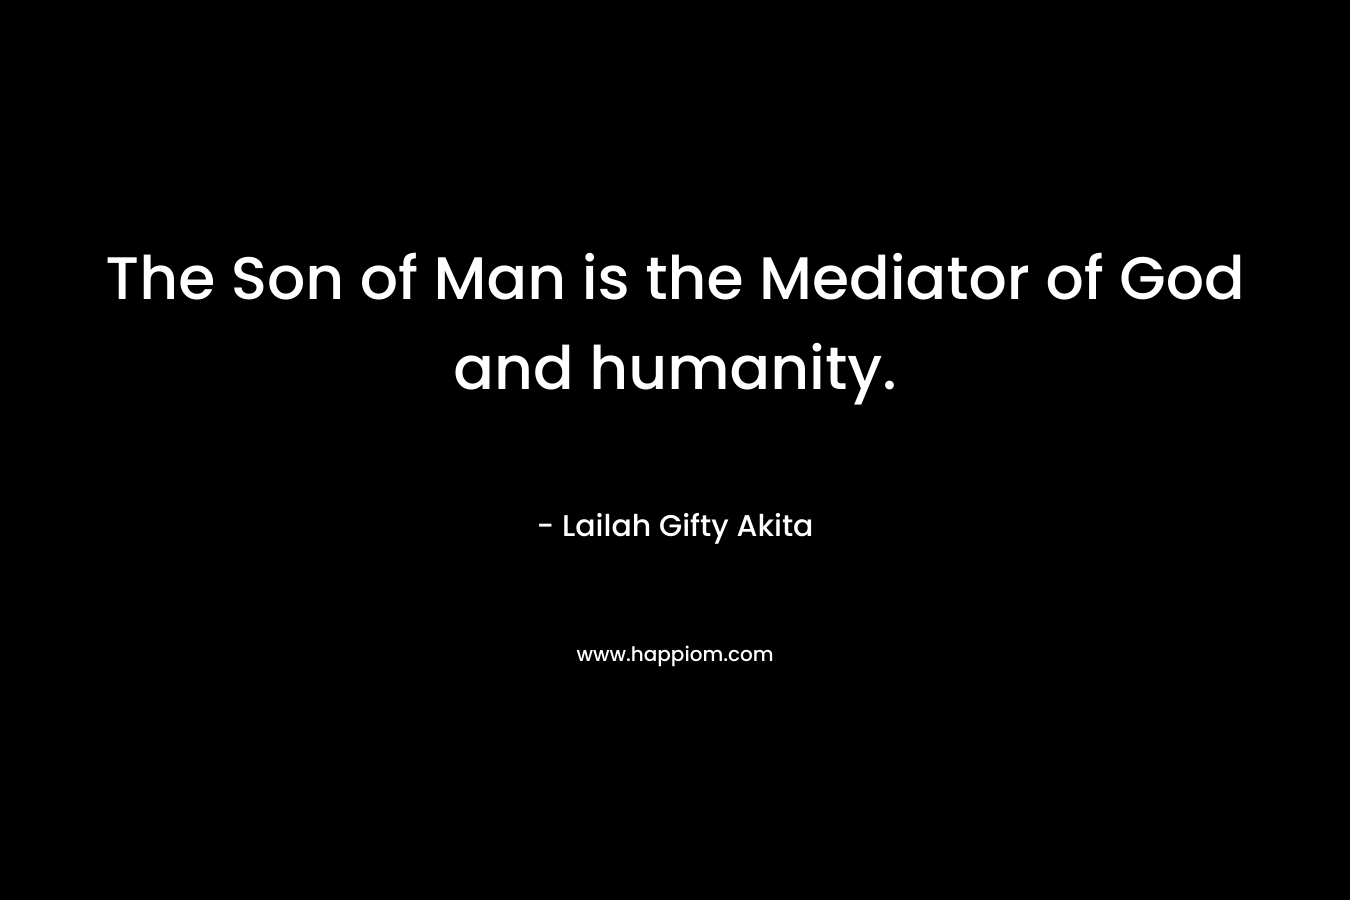 The Son of Man is the Mediator of God and humanity. – Lailah Gifty Akita